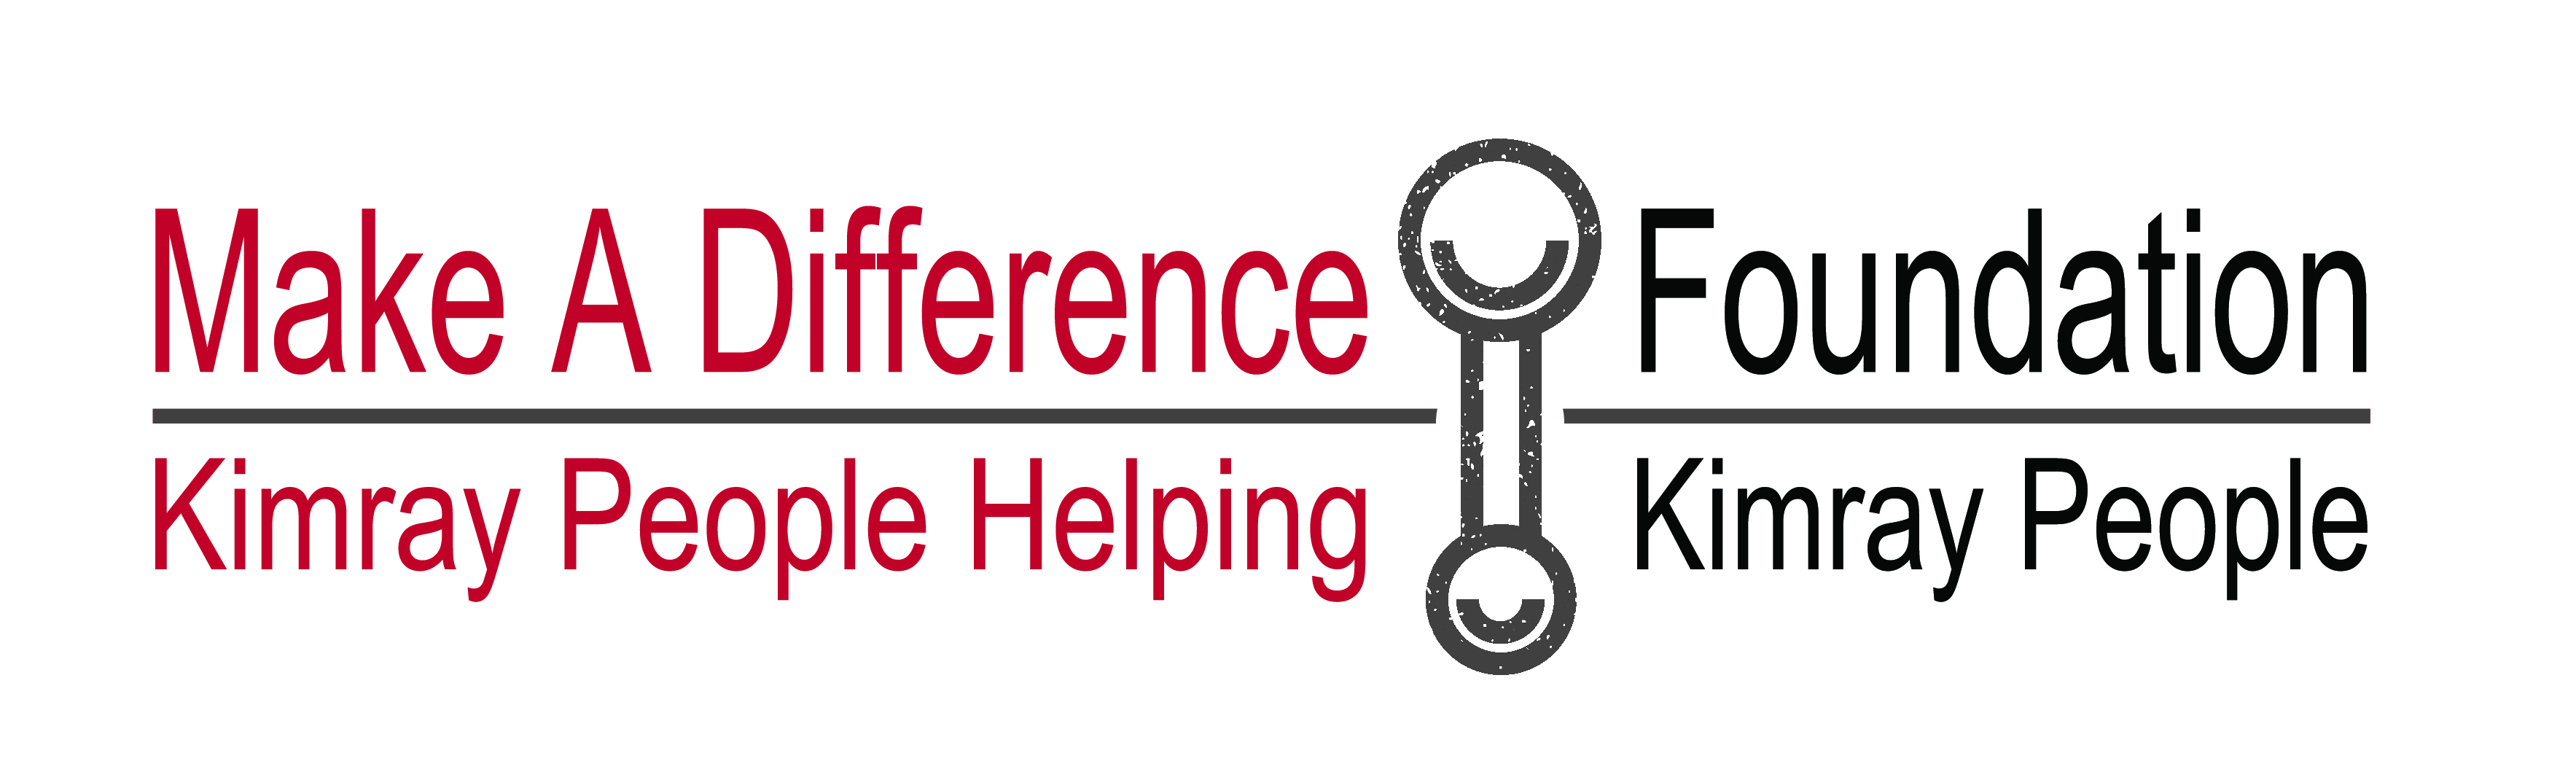 Make A Difference Foundation Logo